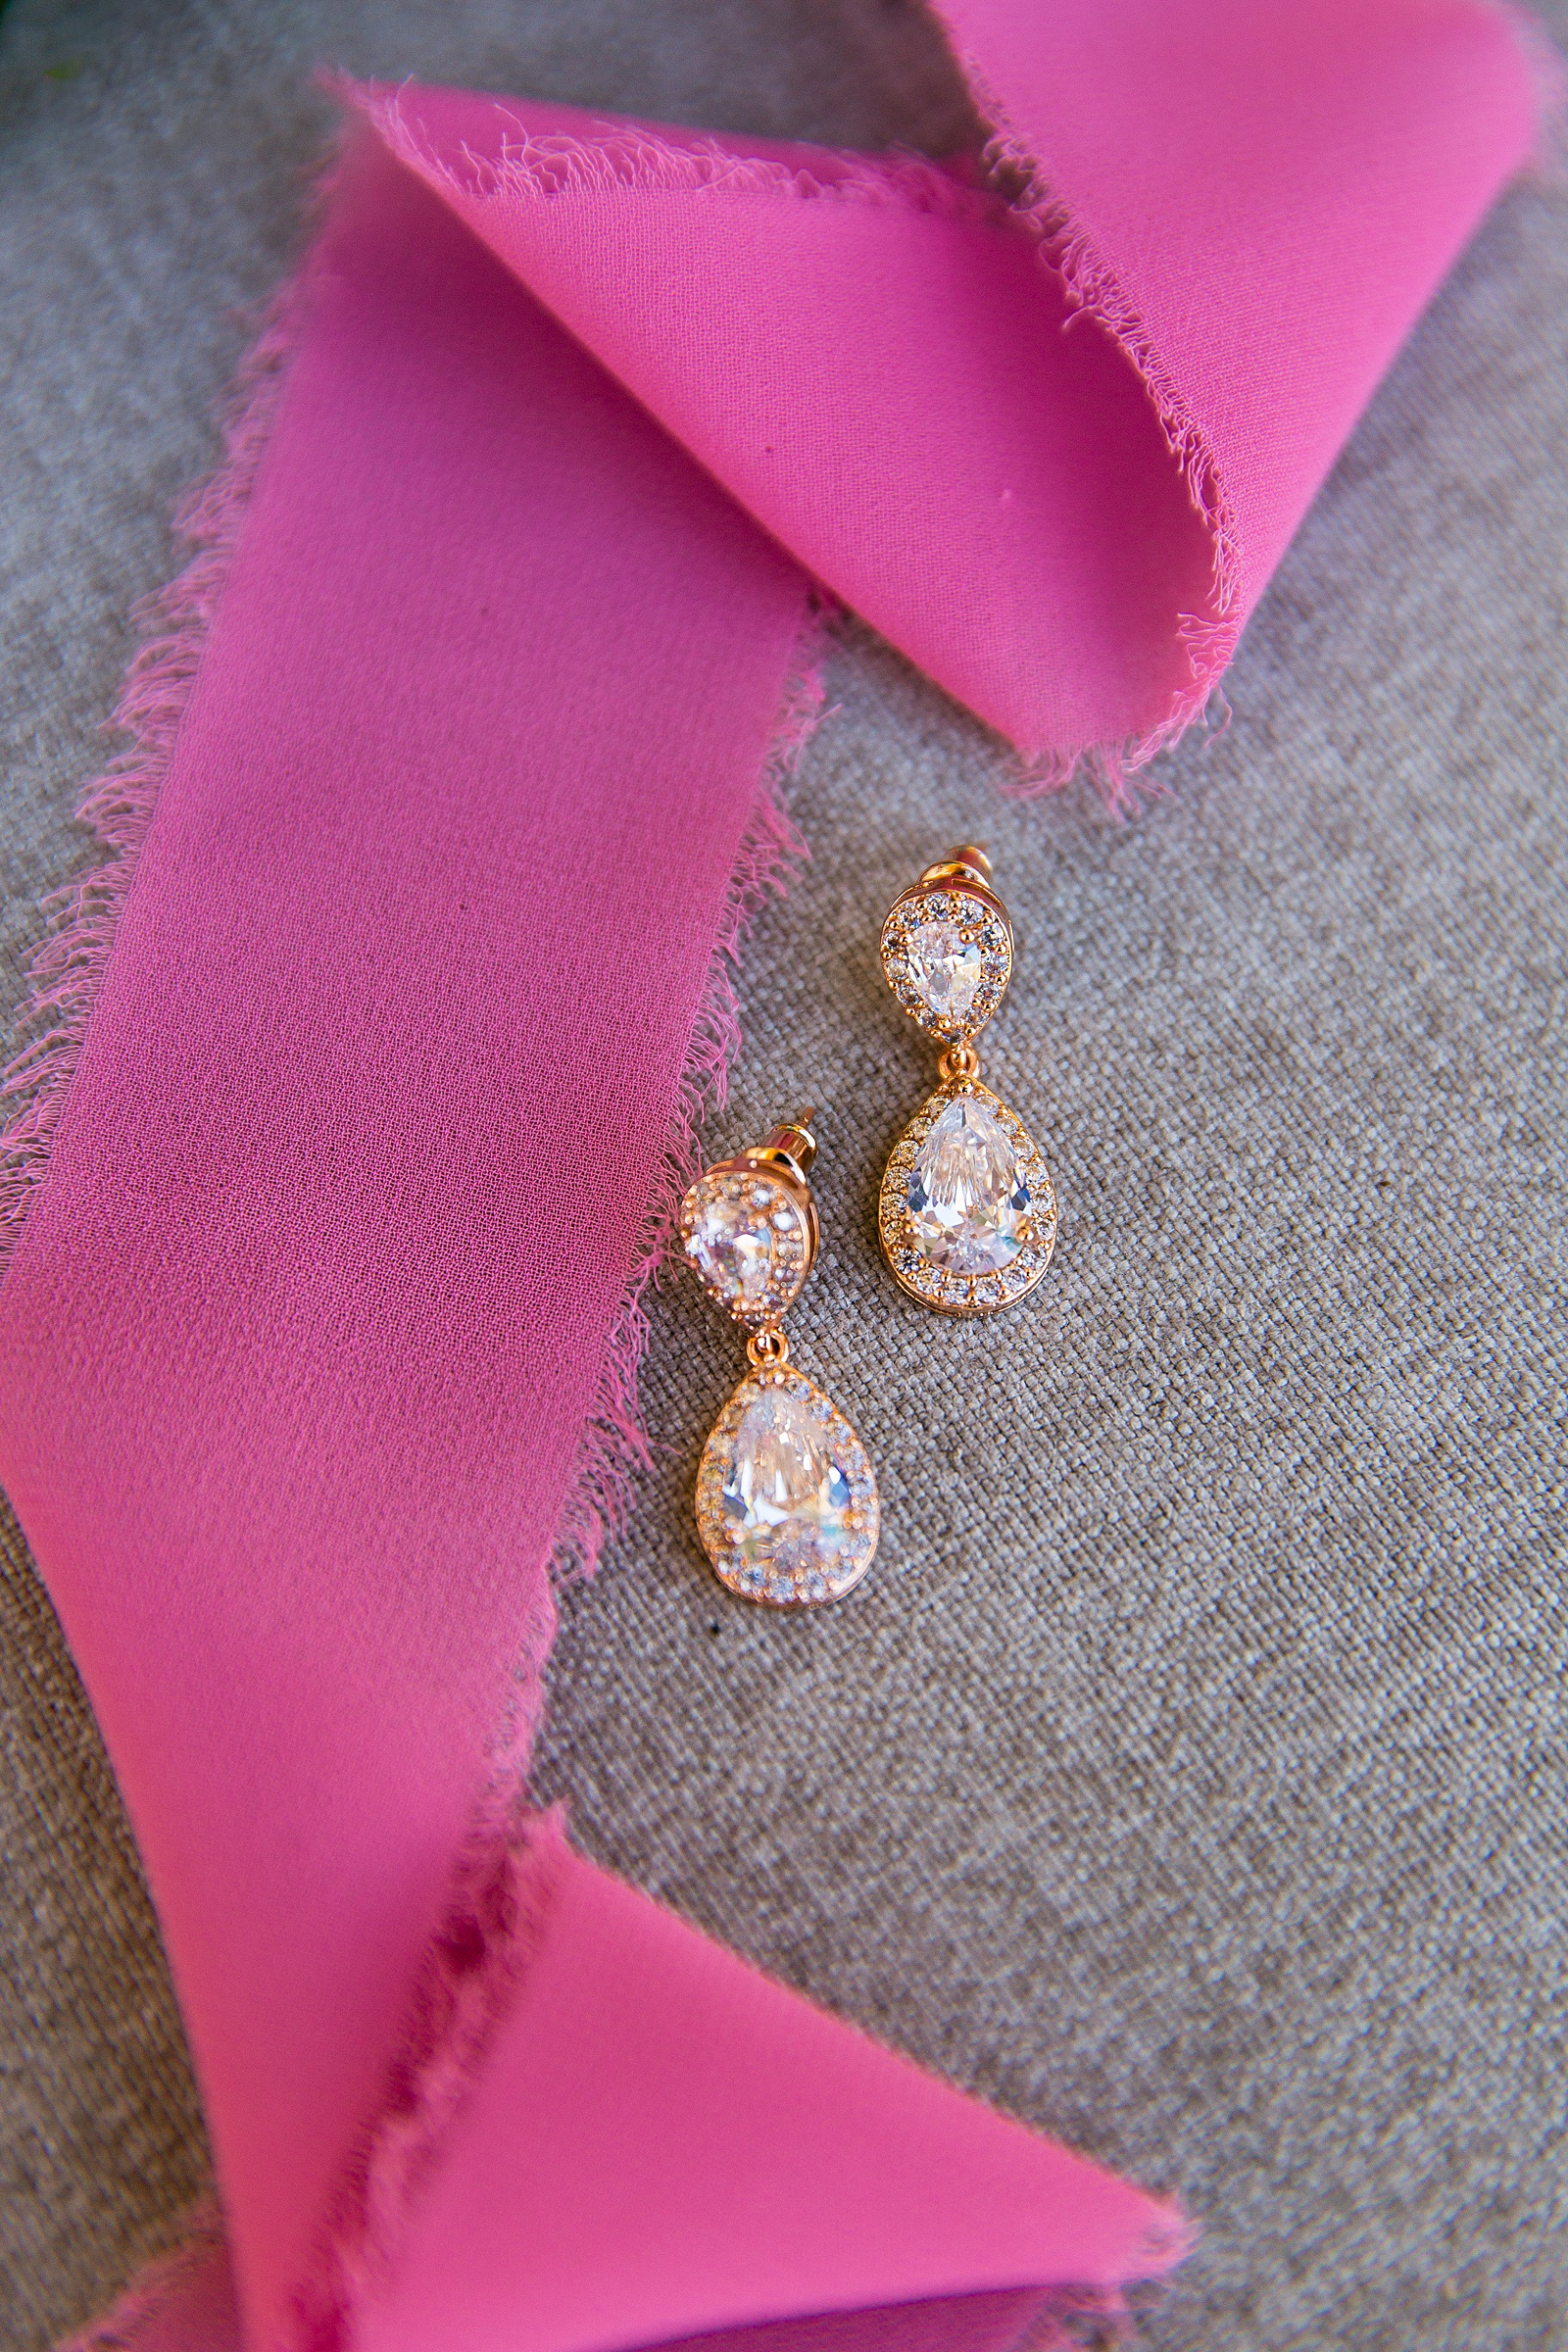 Bride's gold teardrop earrings with a pink ribbon by Arizona wedding photographer PMA Photography.